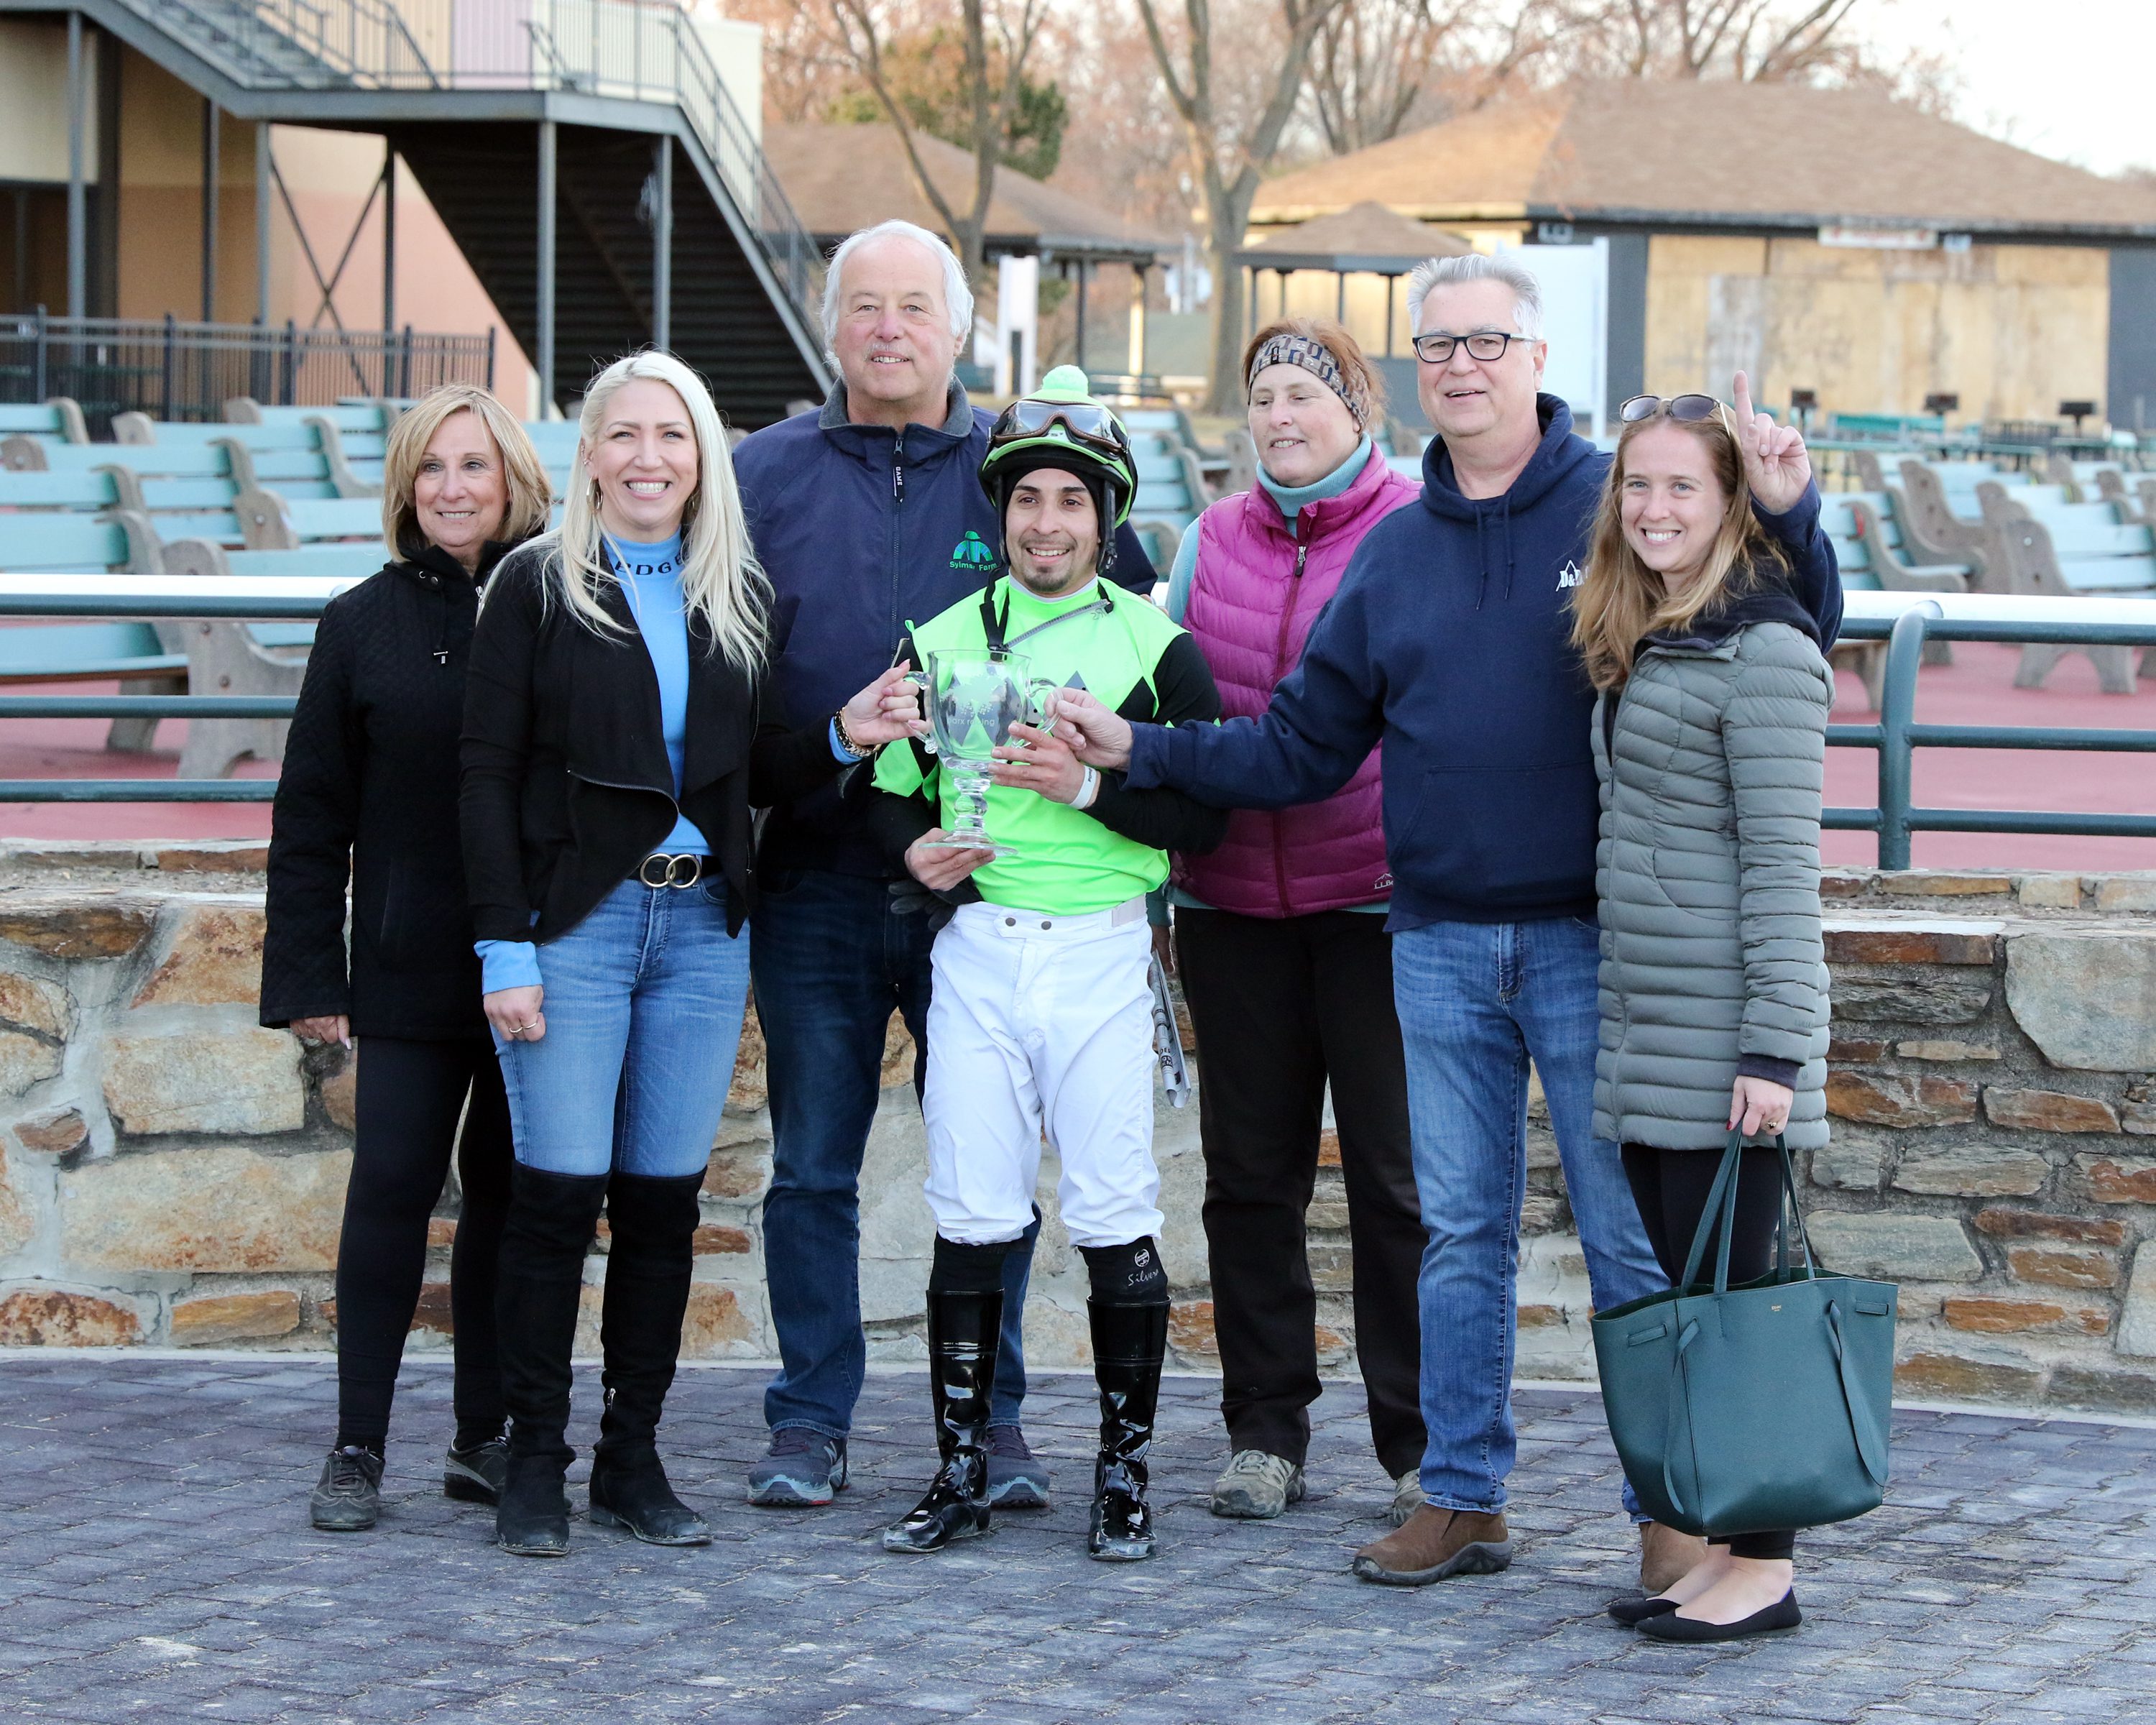 The Winners' Circle presentation after The City of Brotherly Love at Parx on March 8, 2022. Photo By: Chad B. Harmon